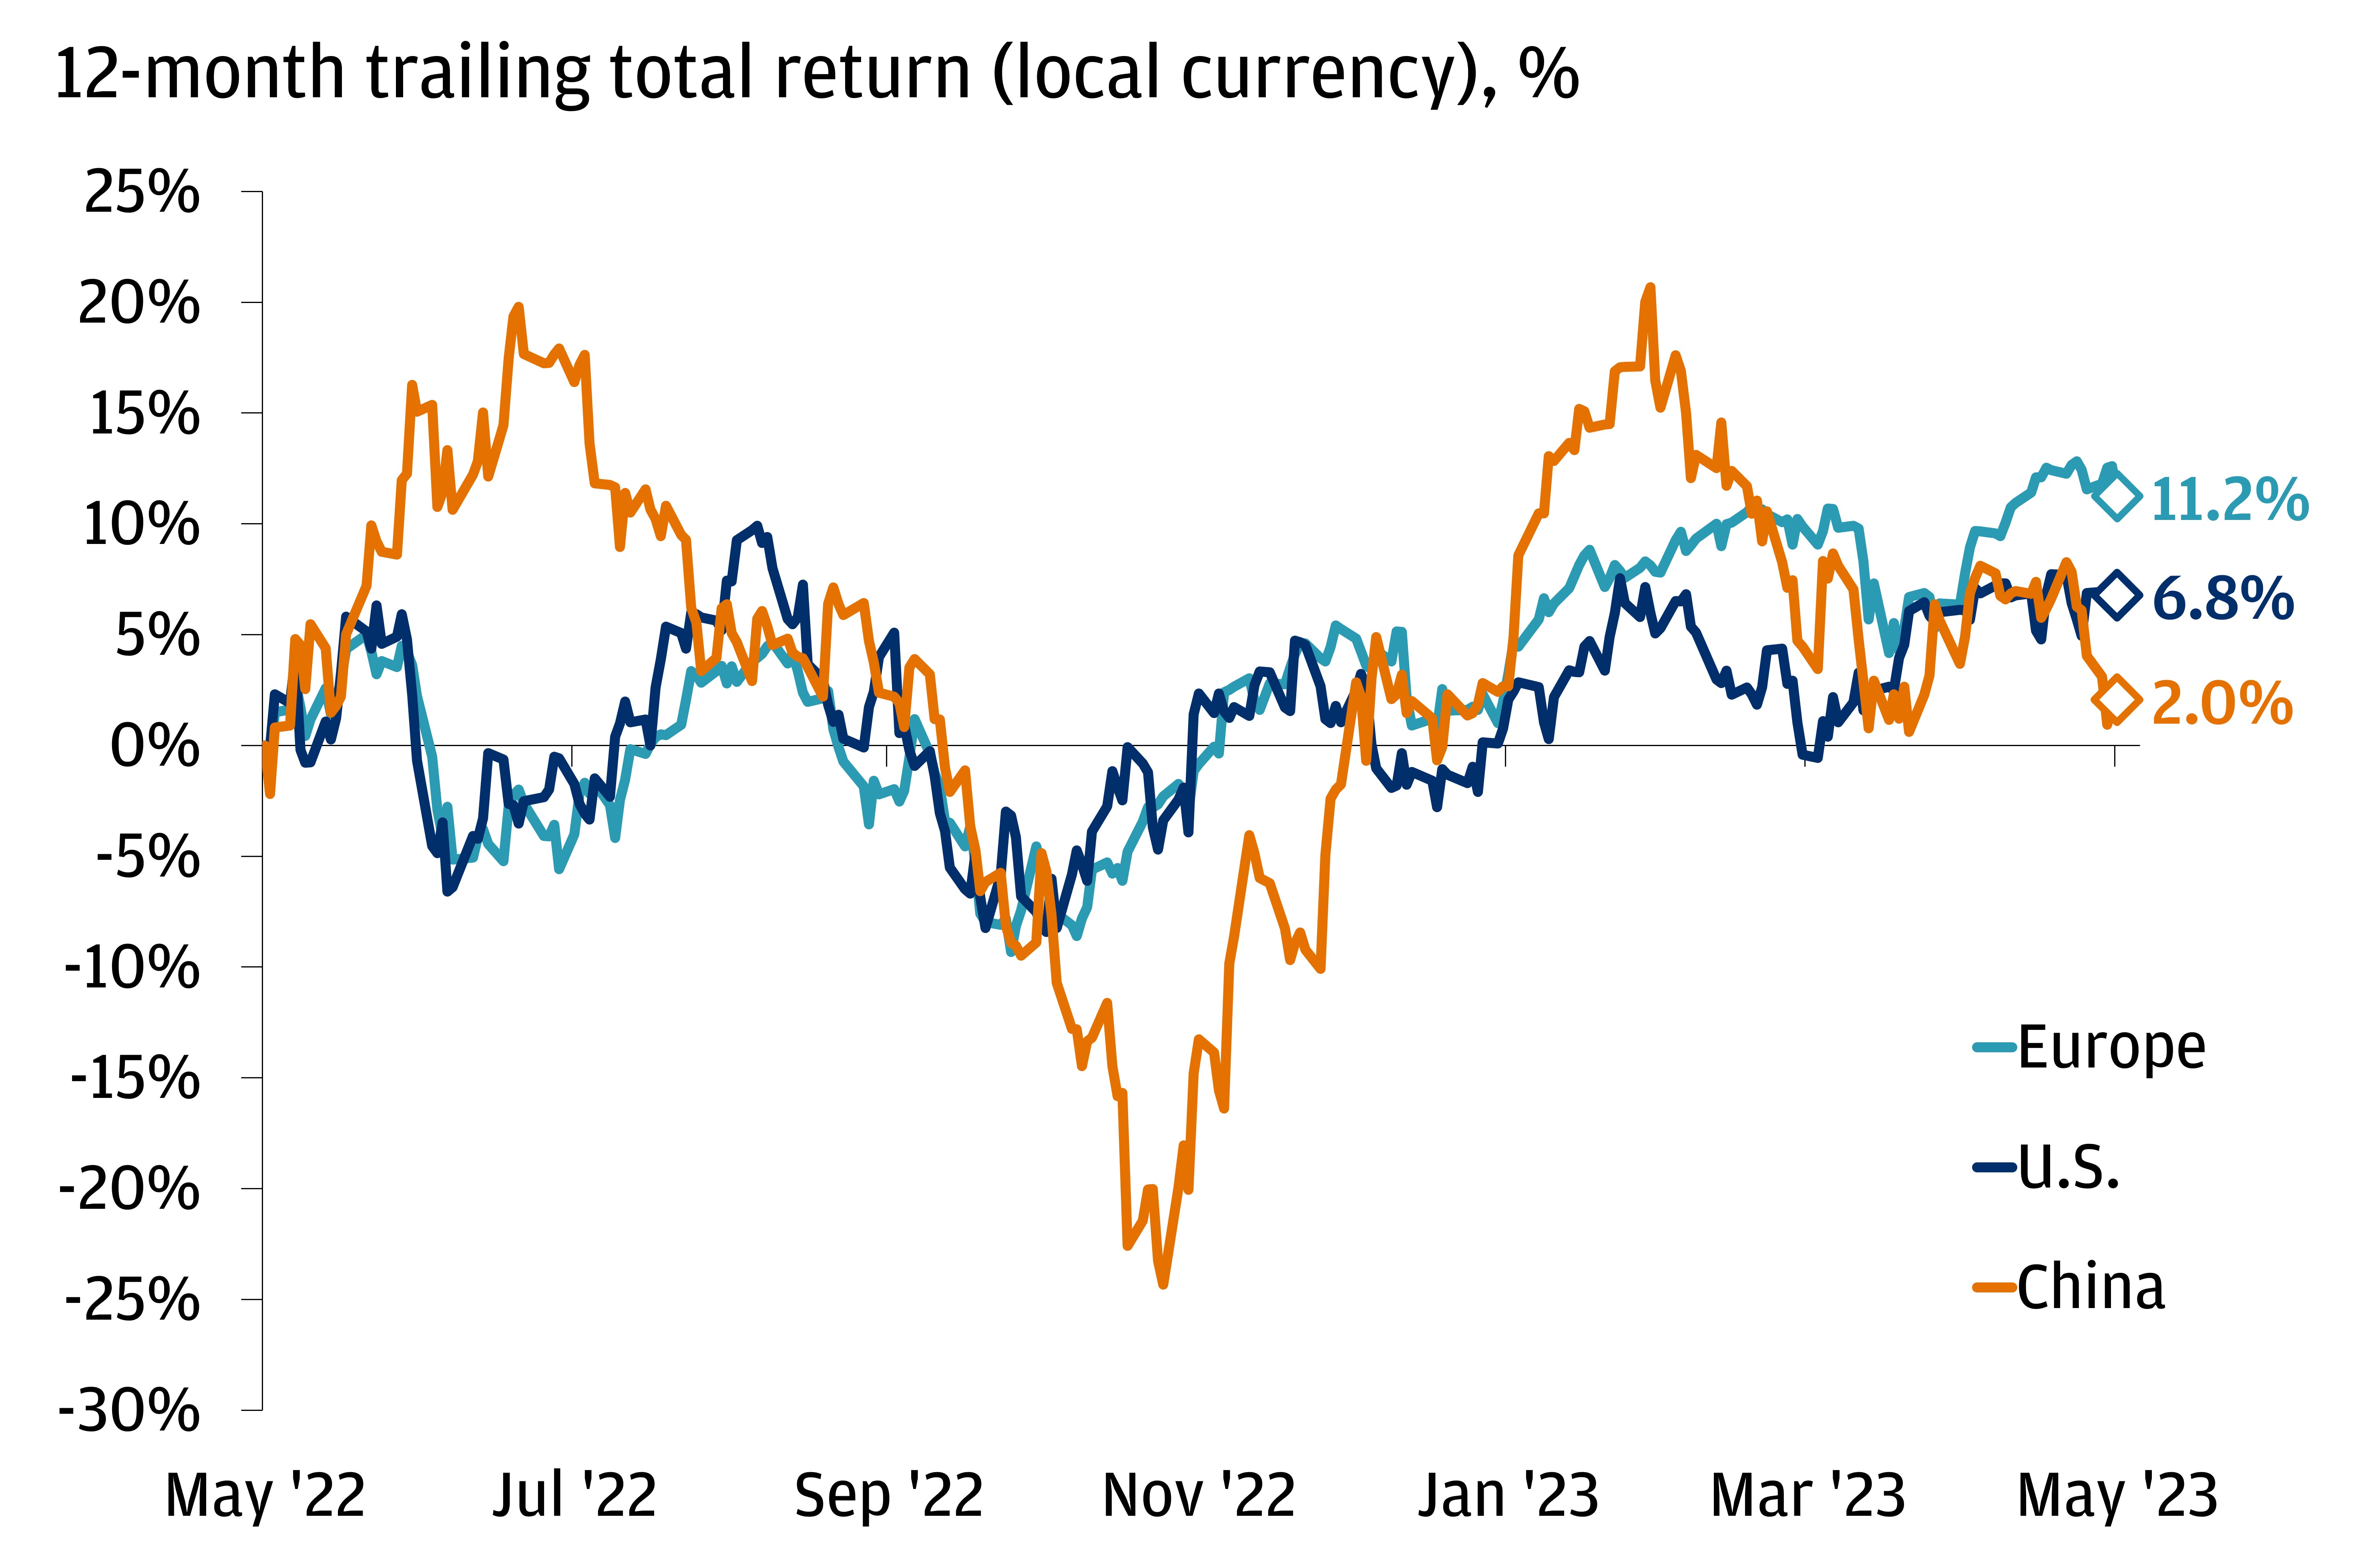 The chart describes the 12-month trailing total return (local currency) for Europe stocks, U.S. stocks and China stocks.